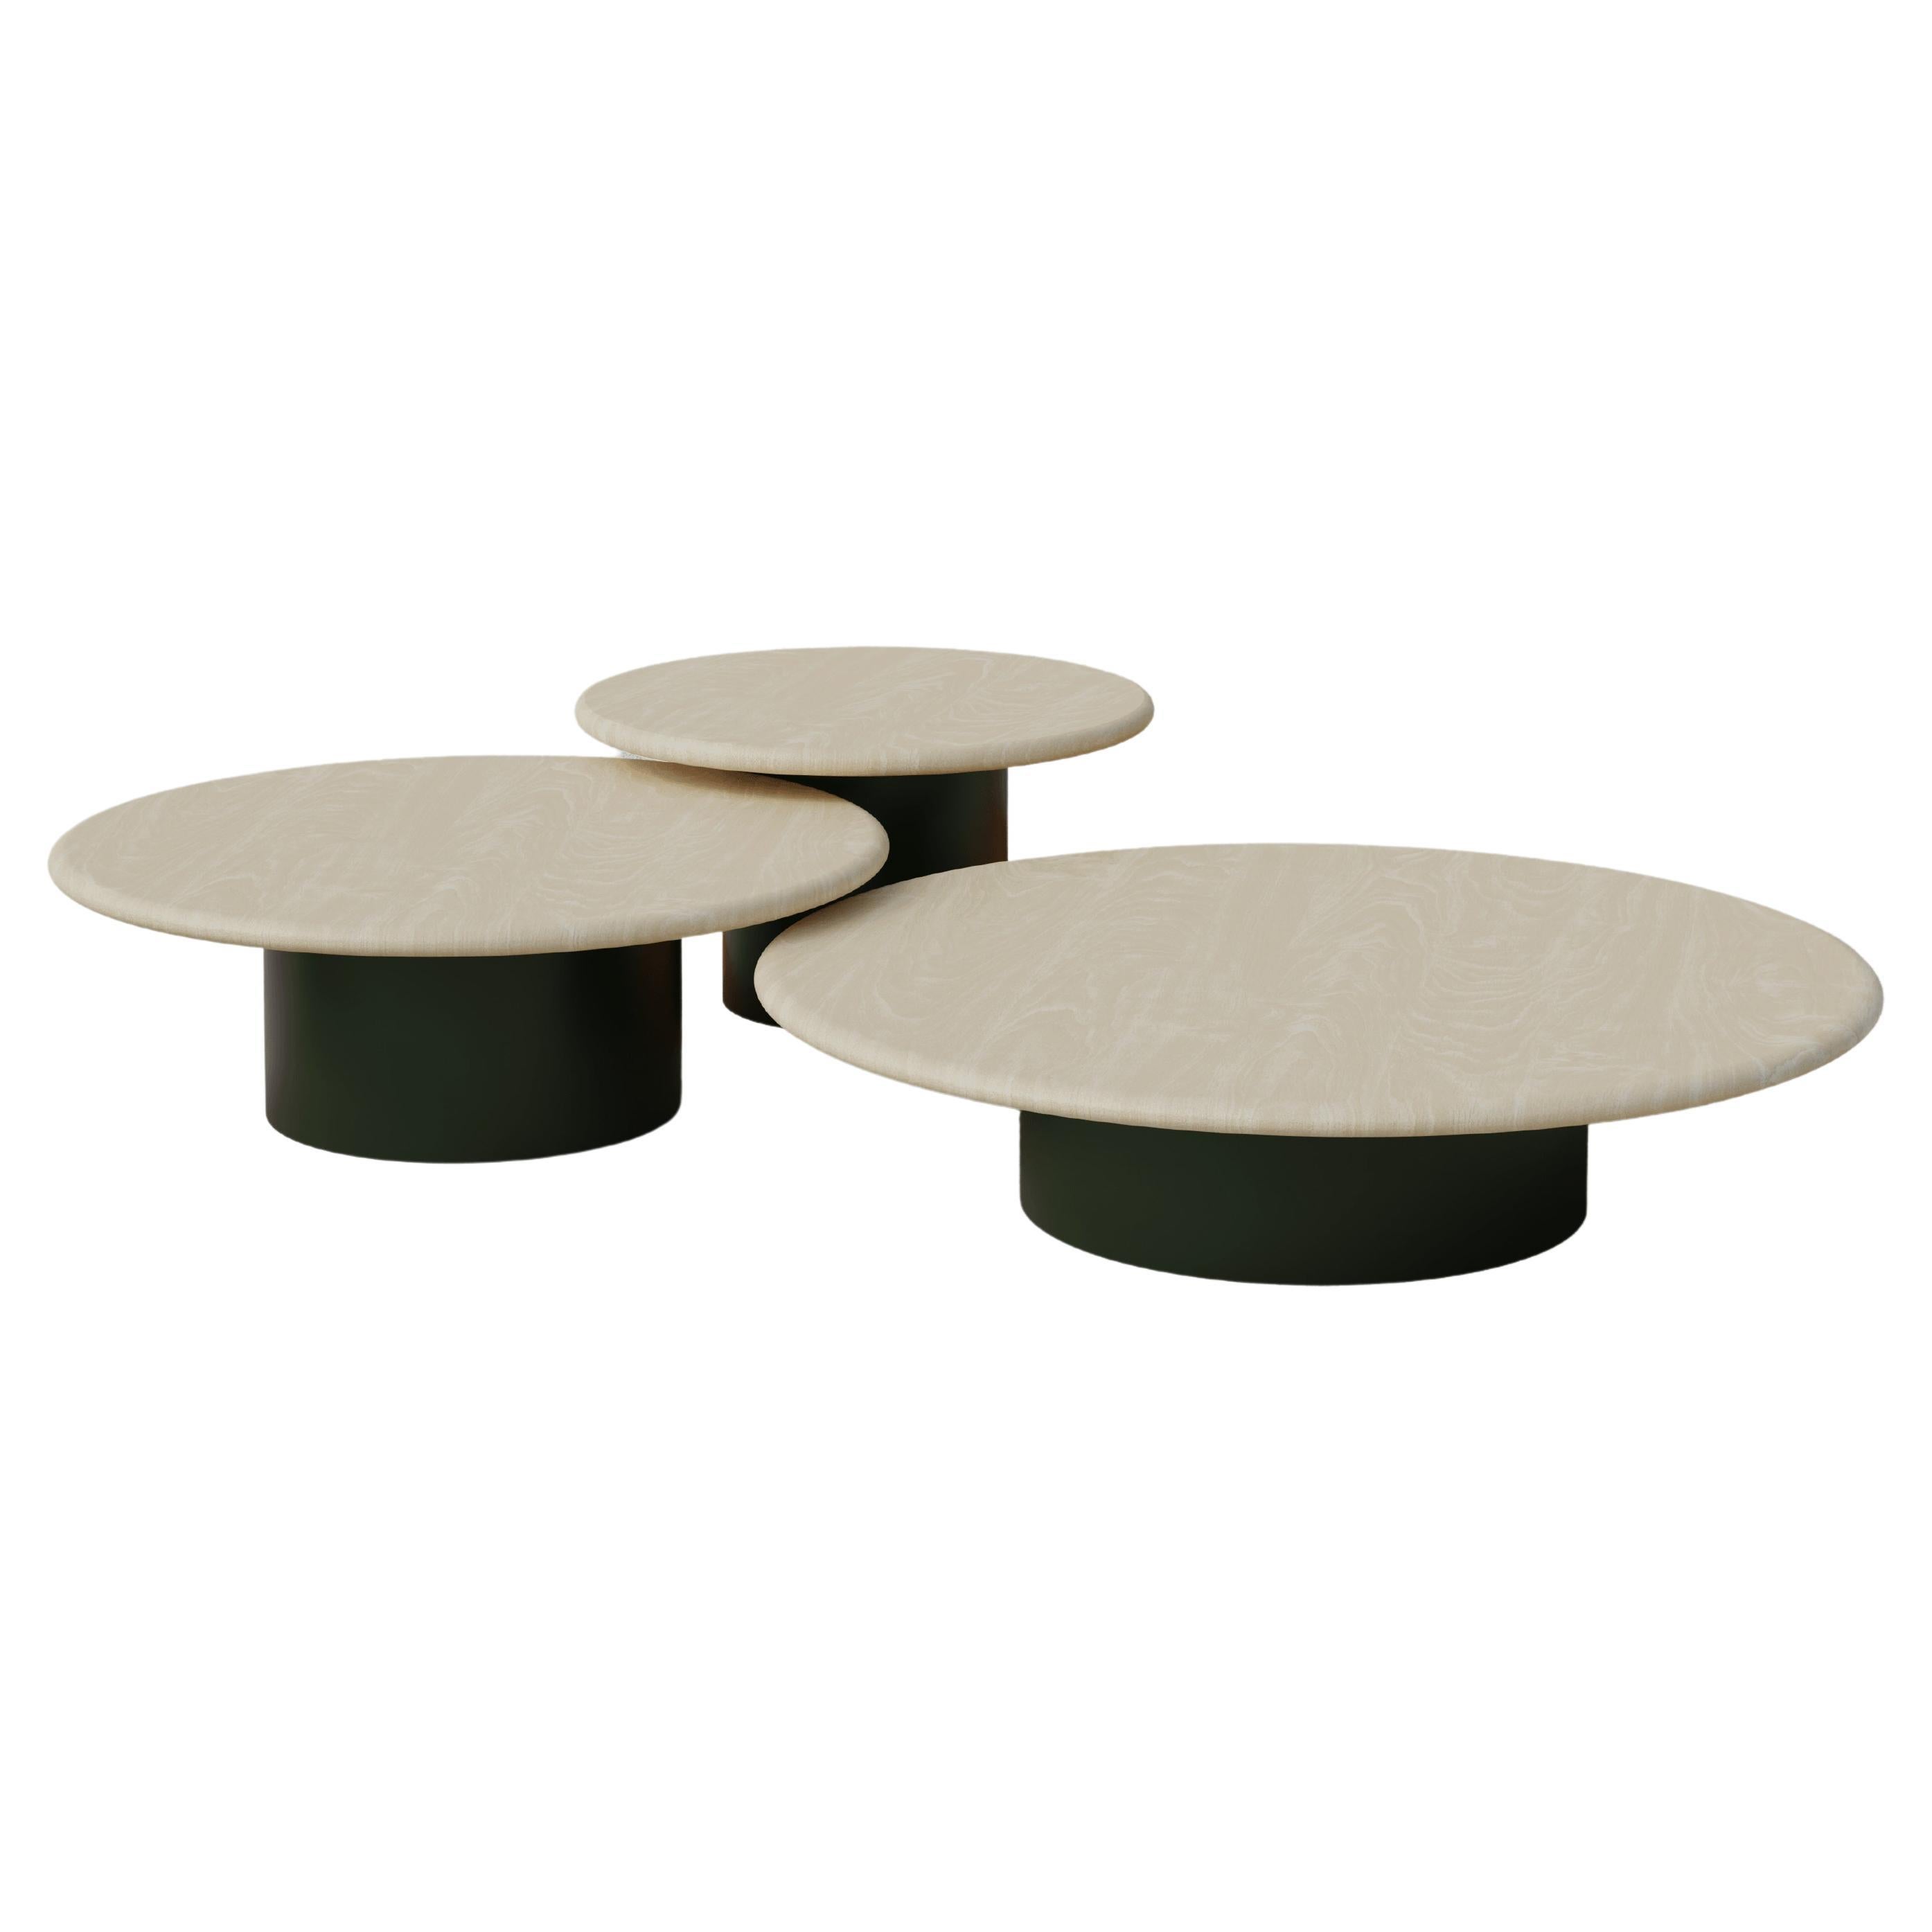 Raindrop Coffee Table Set, 600, 800, 1000, Ash / Moss Green For Sale